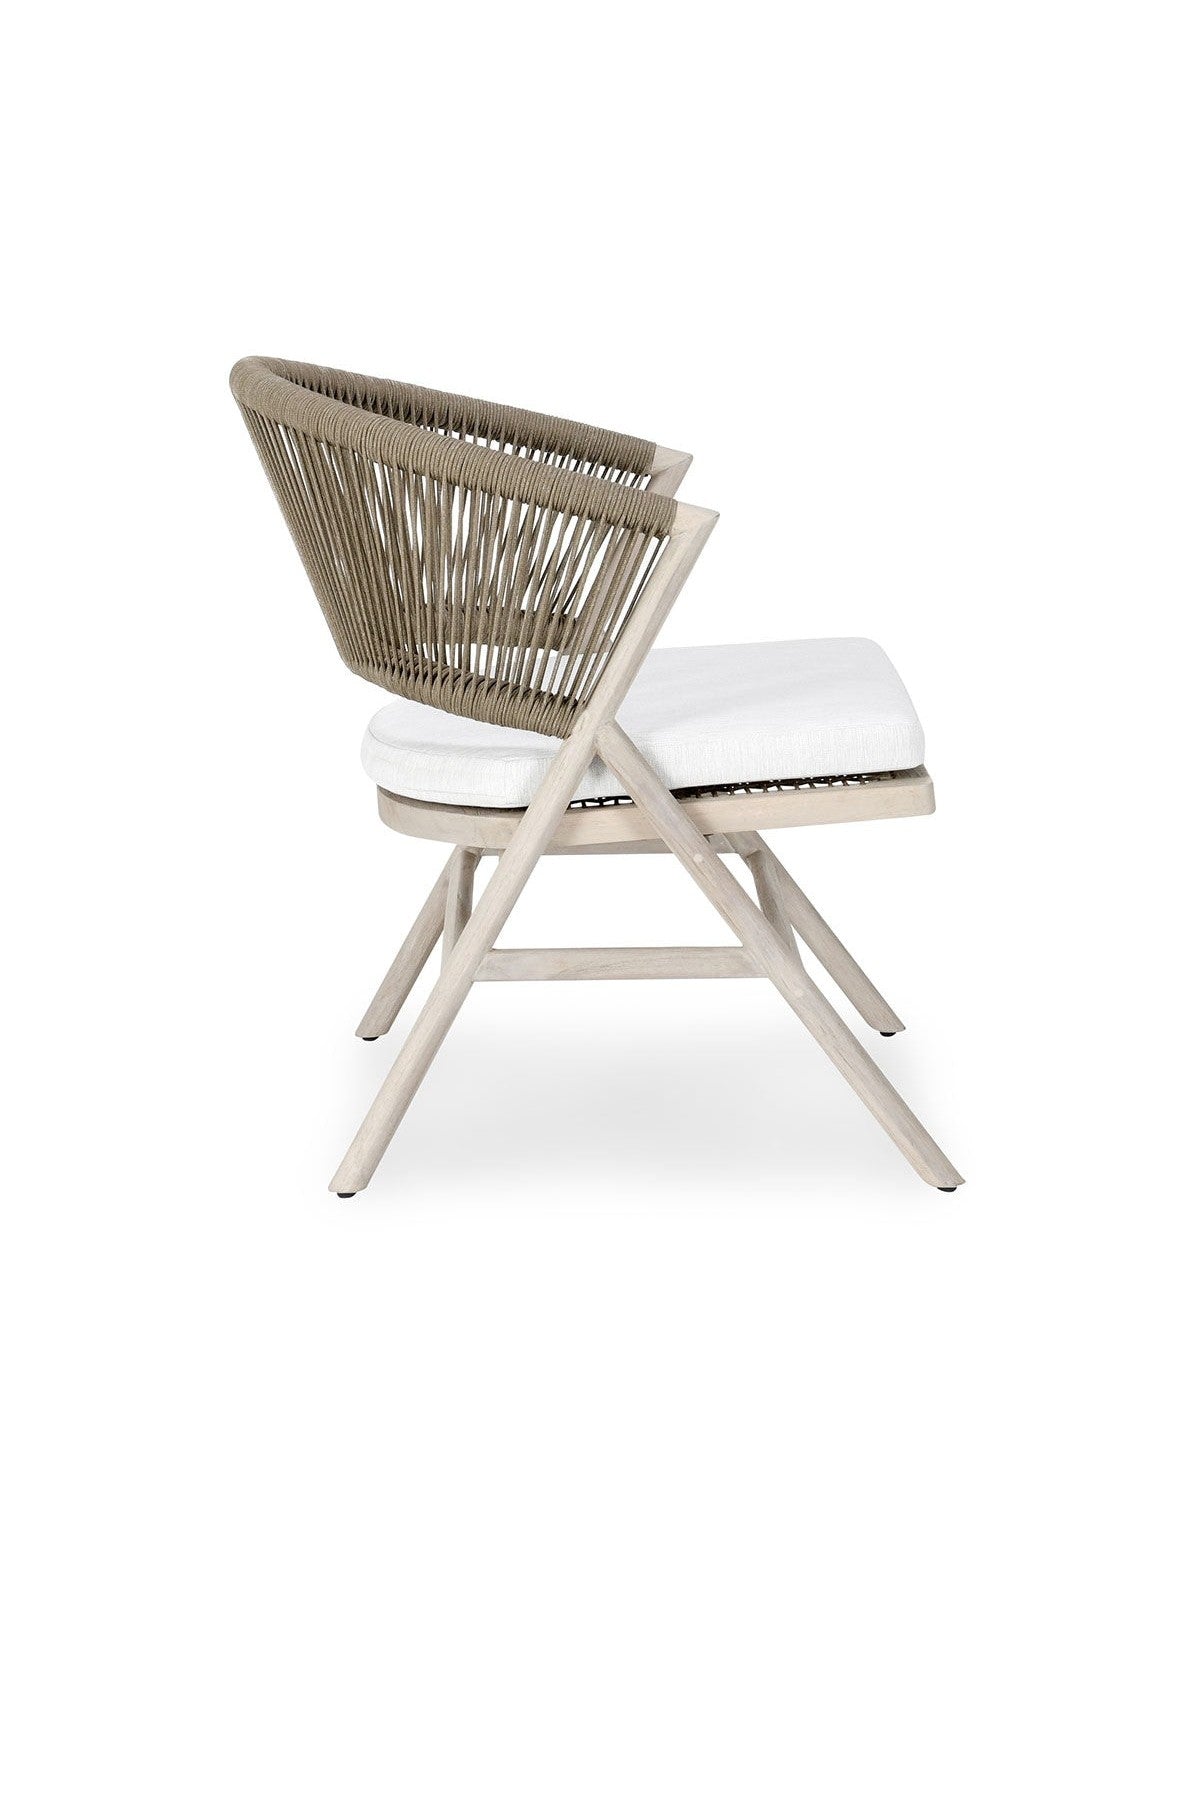 Carmel Outdoor Accent Chair